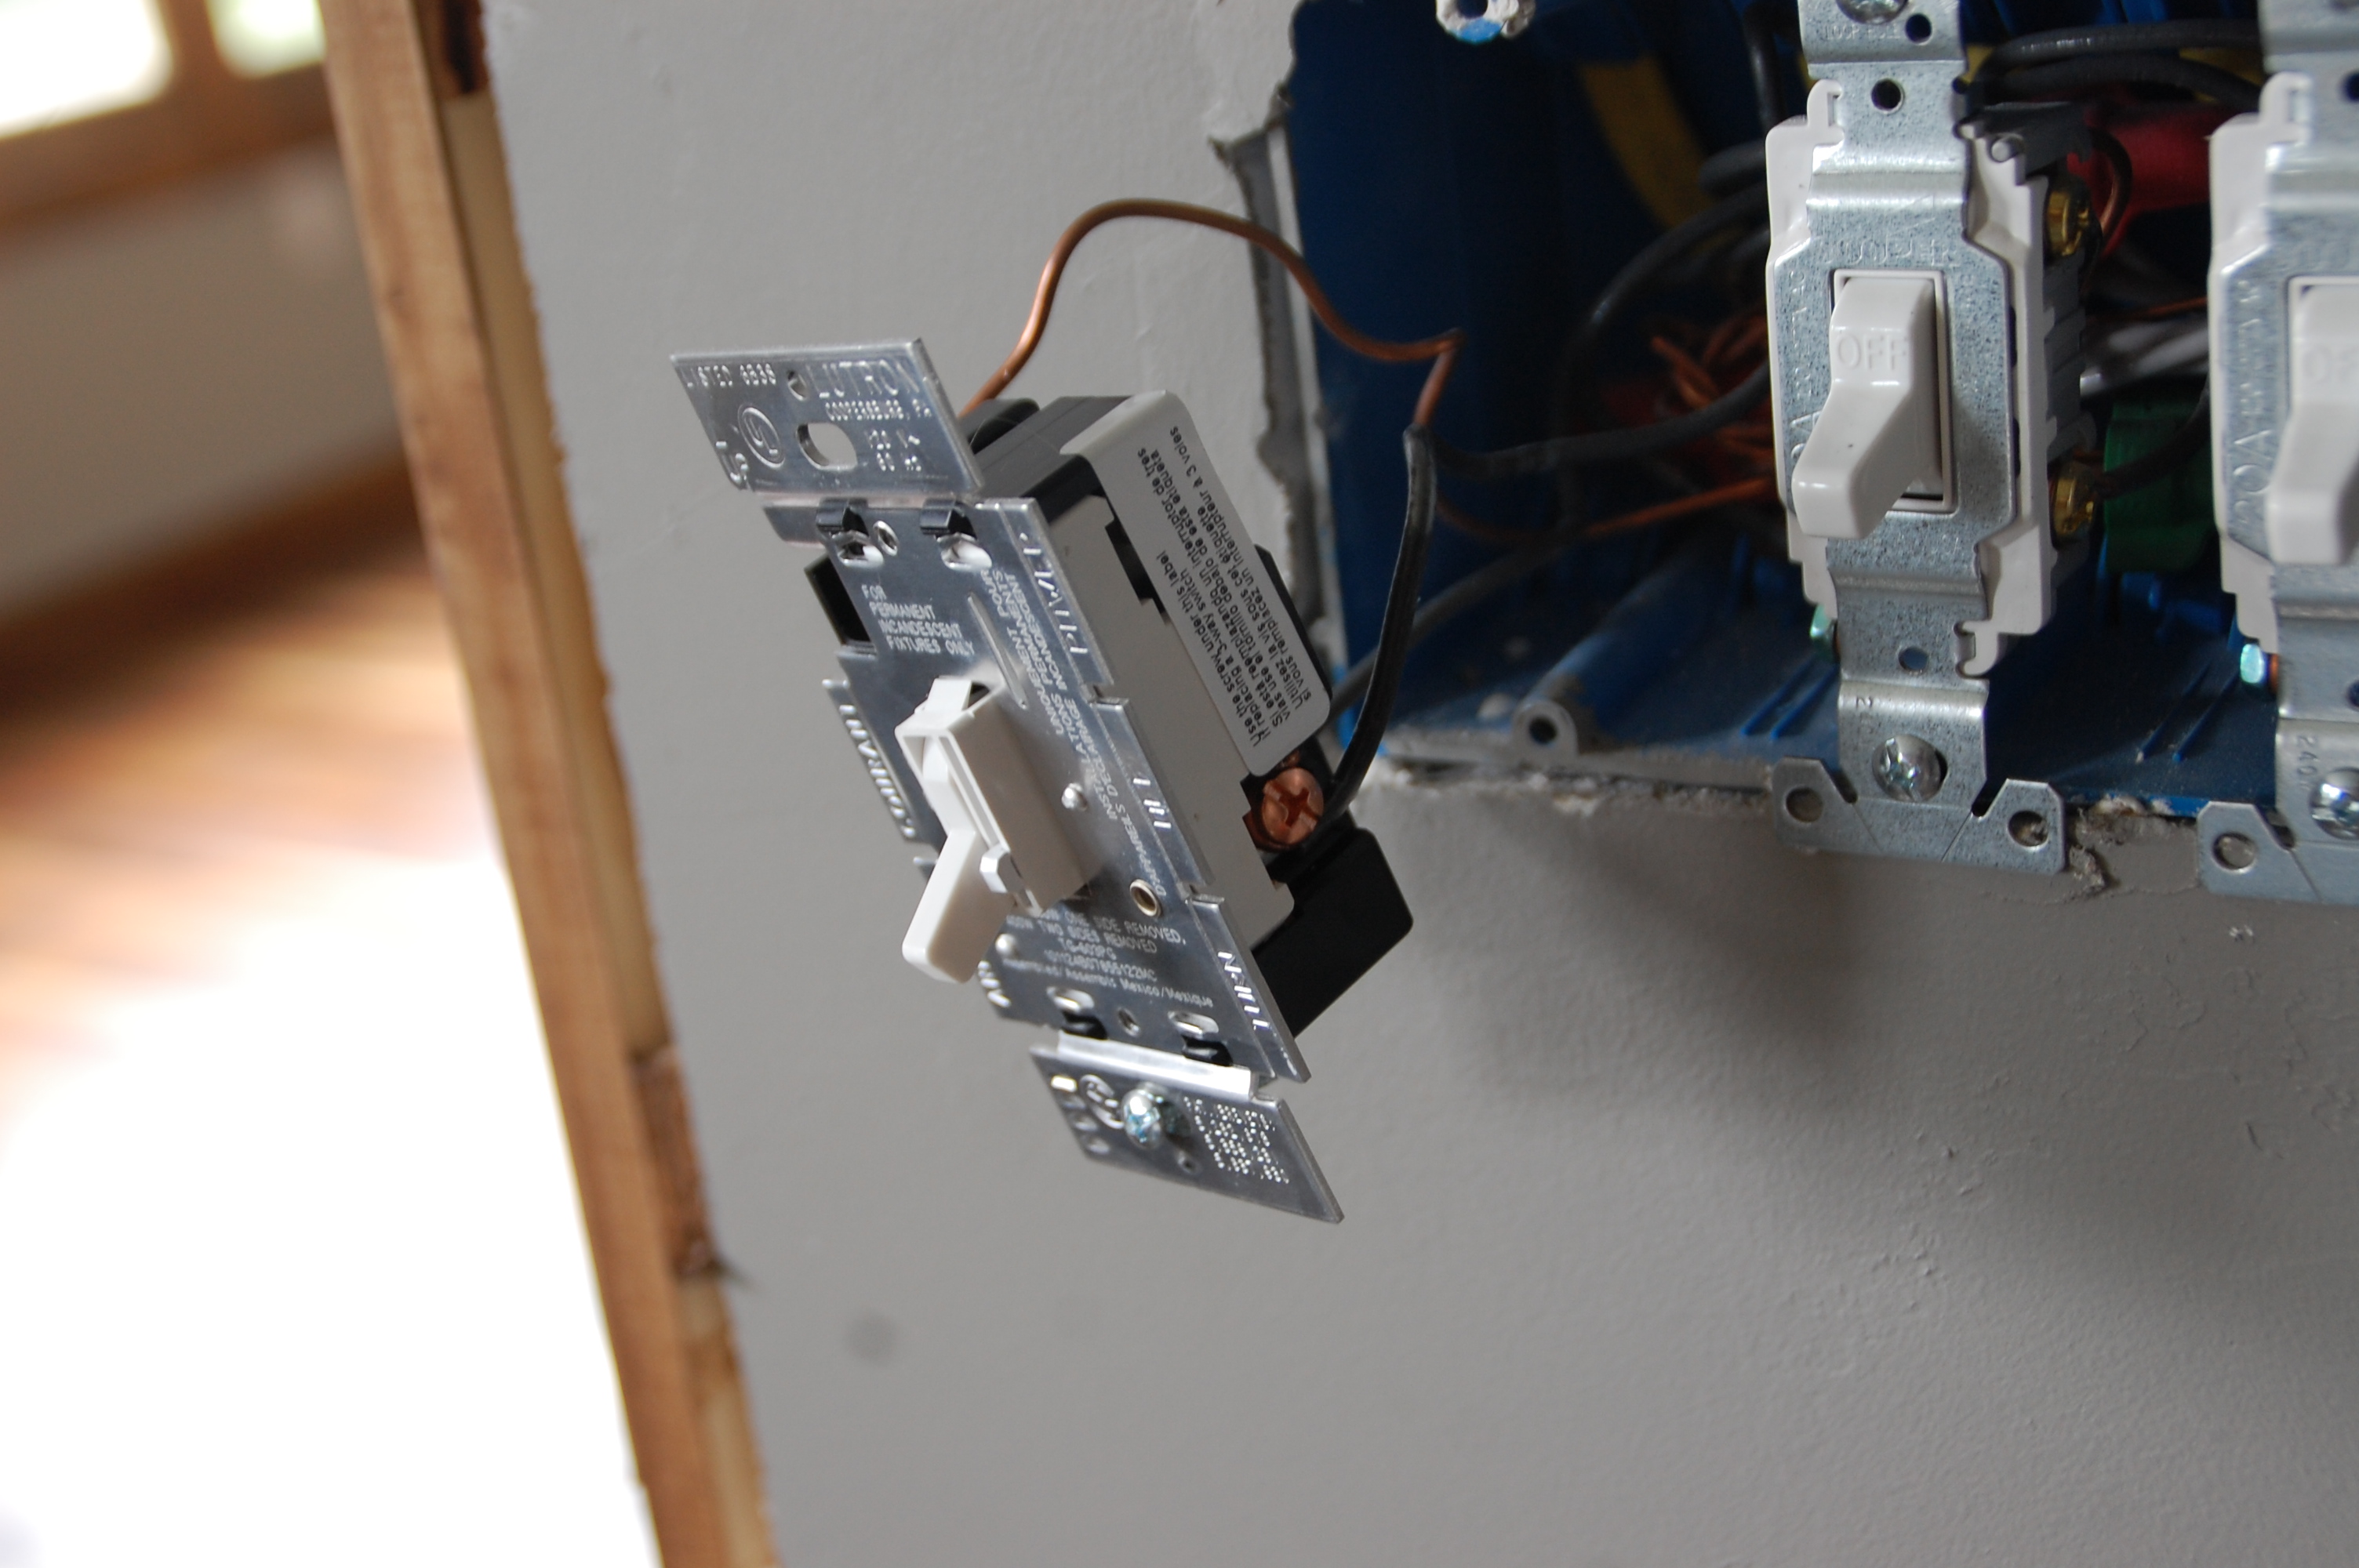 How to Install a Dimmer Switch - Putting It Together